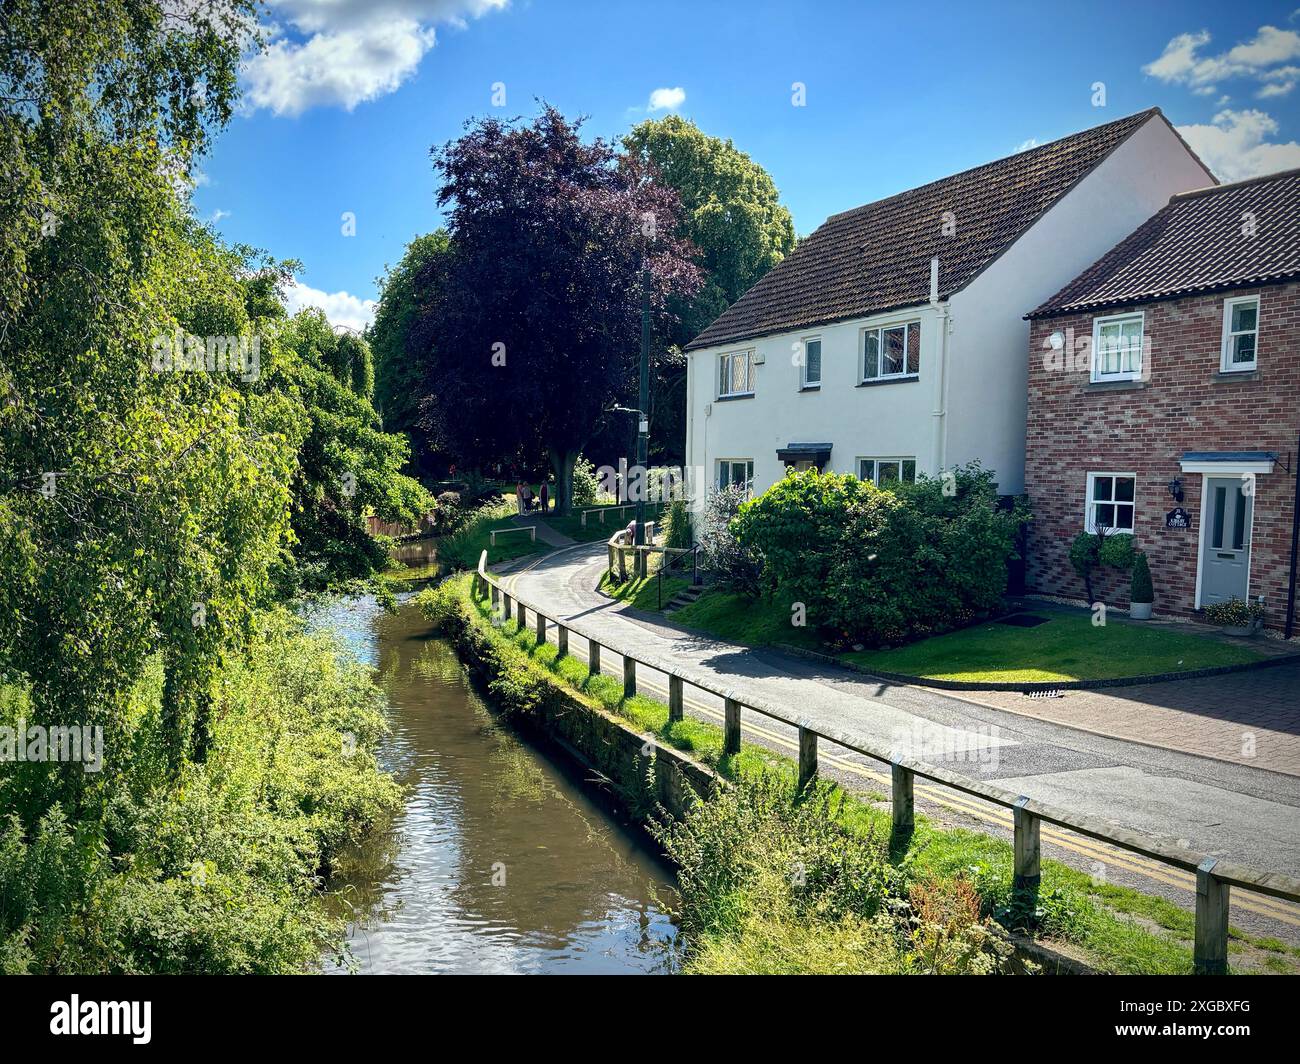 Stokesley, North Yorkshire, UK. 08 Jul 2024. Blue skies and high temperatures made for a stunning summer’s day in Stokesley, North Yorkshire today. The River Leven is pictured running through the village. James Hind/Alamy Live News. Stock Photo